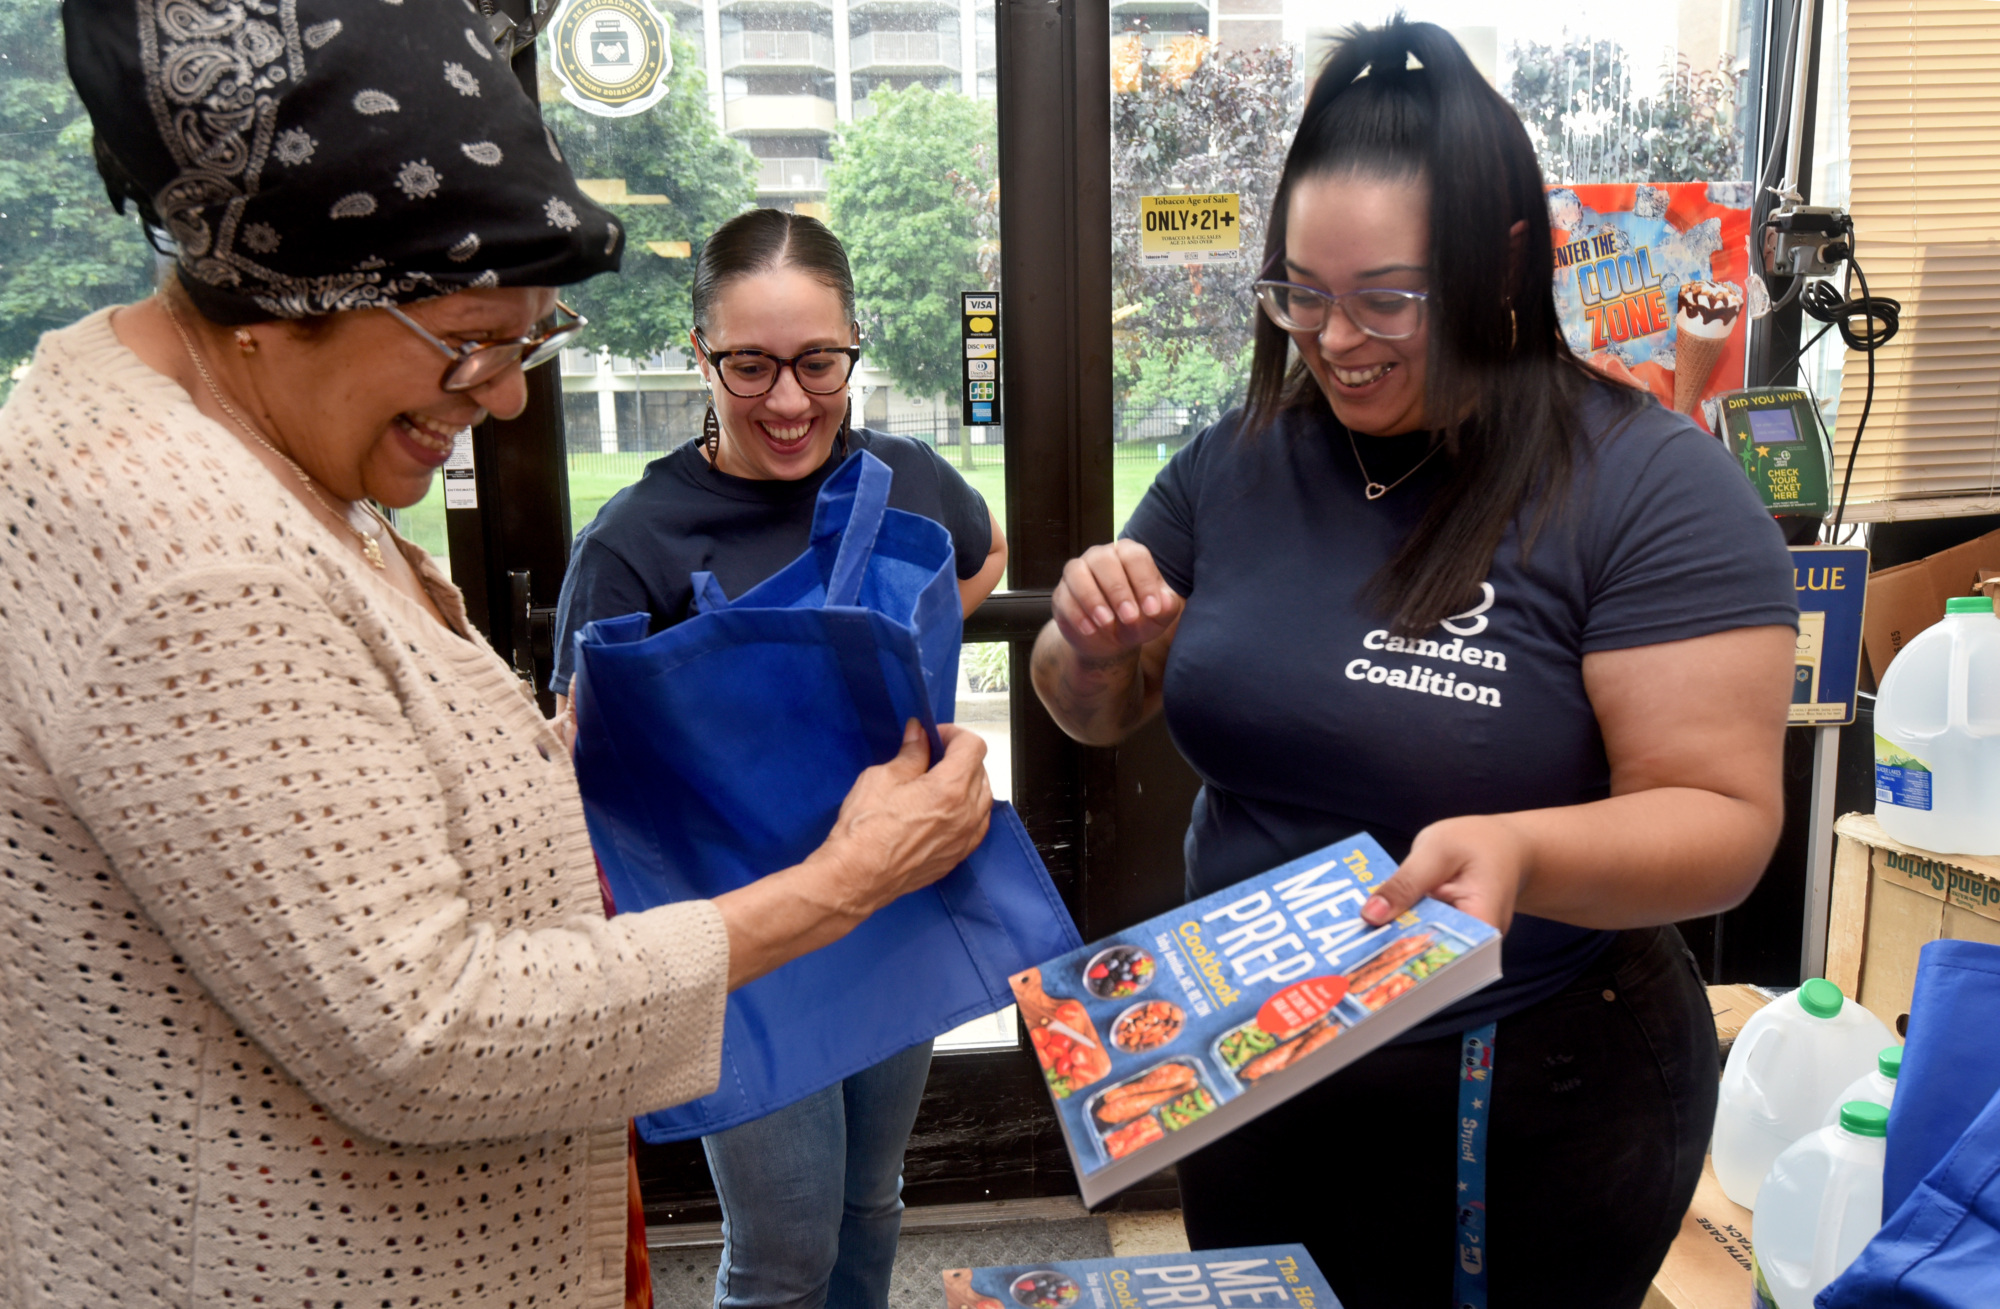 Camden Coalition CHWs hand a cookbook to a community member